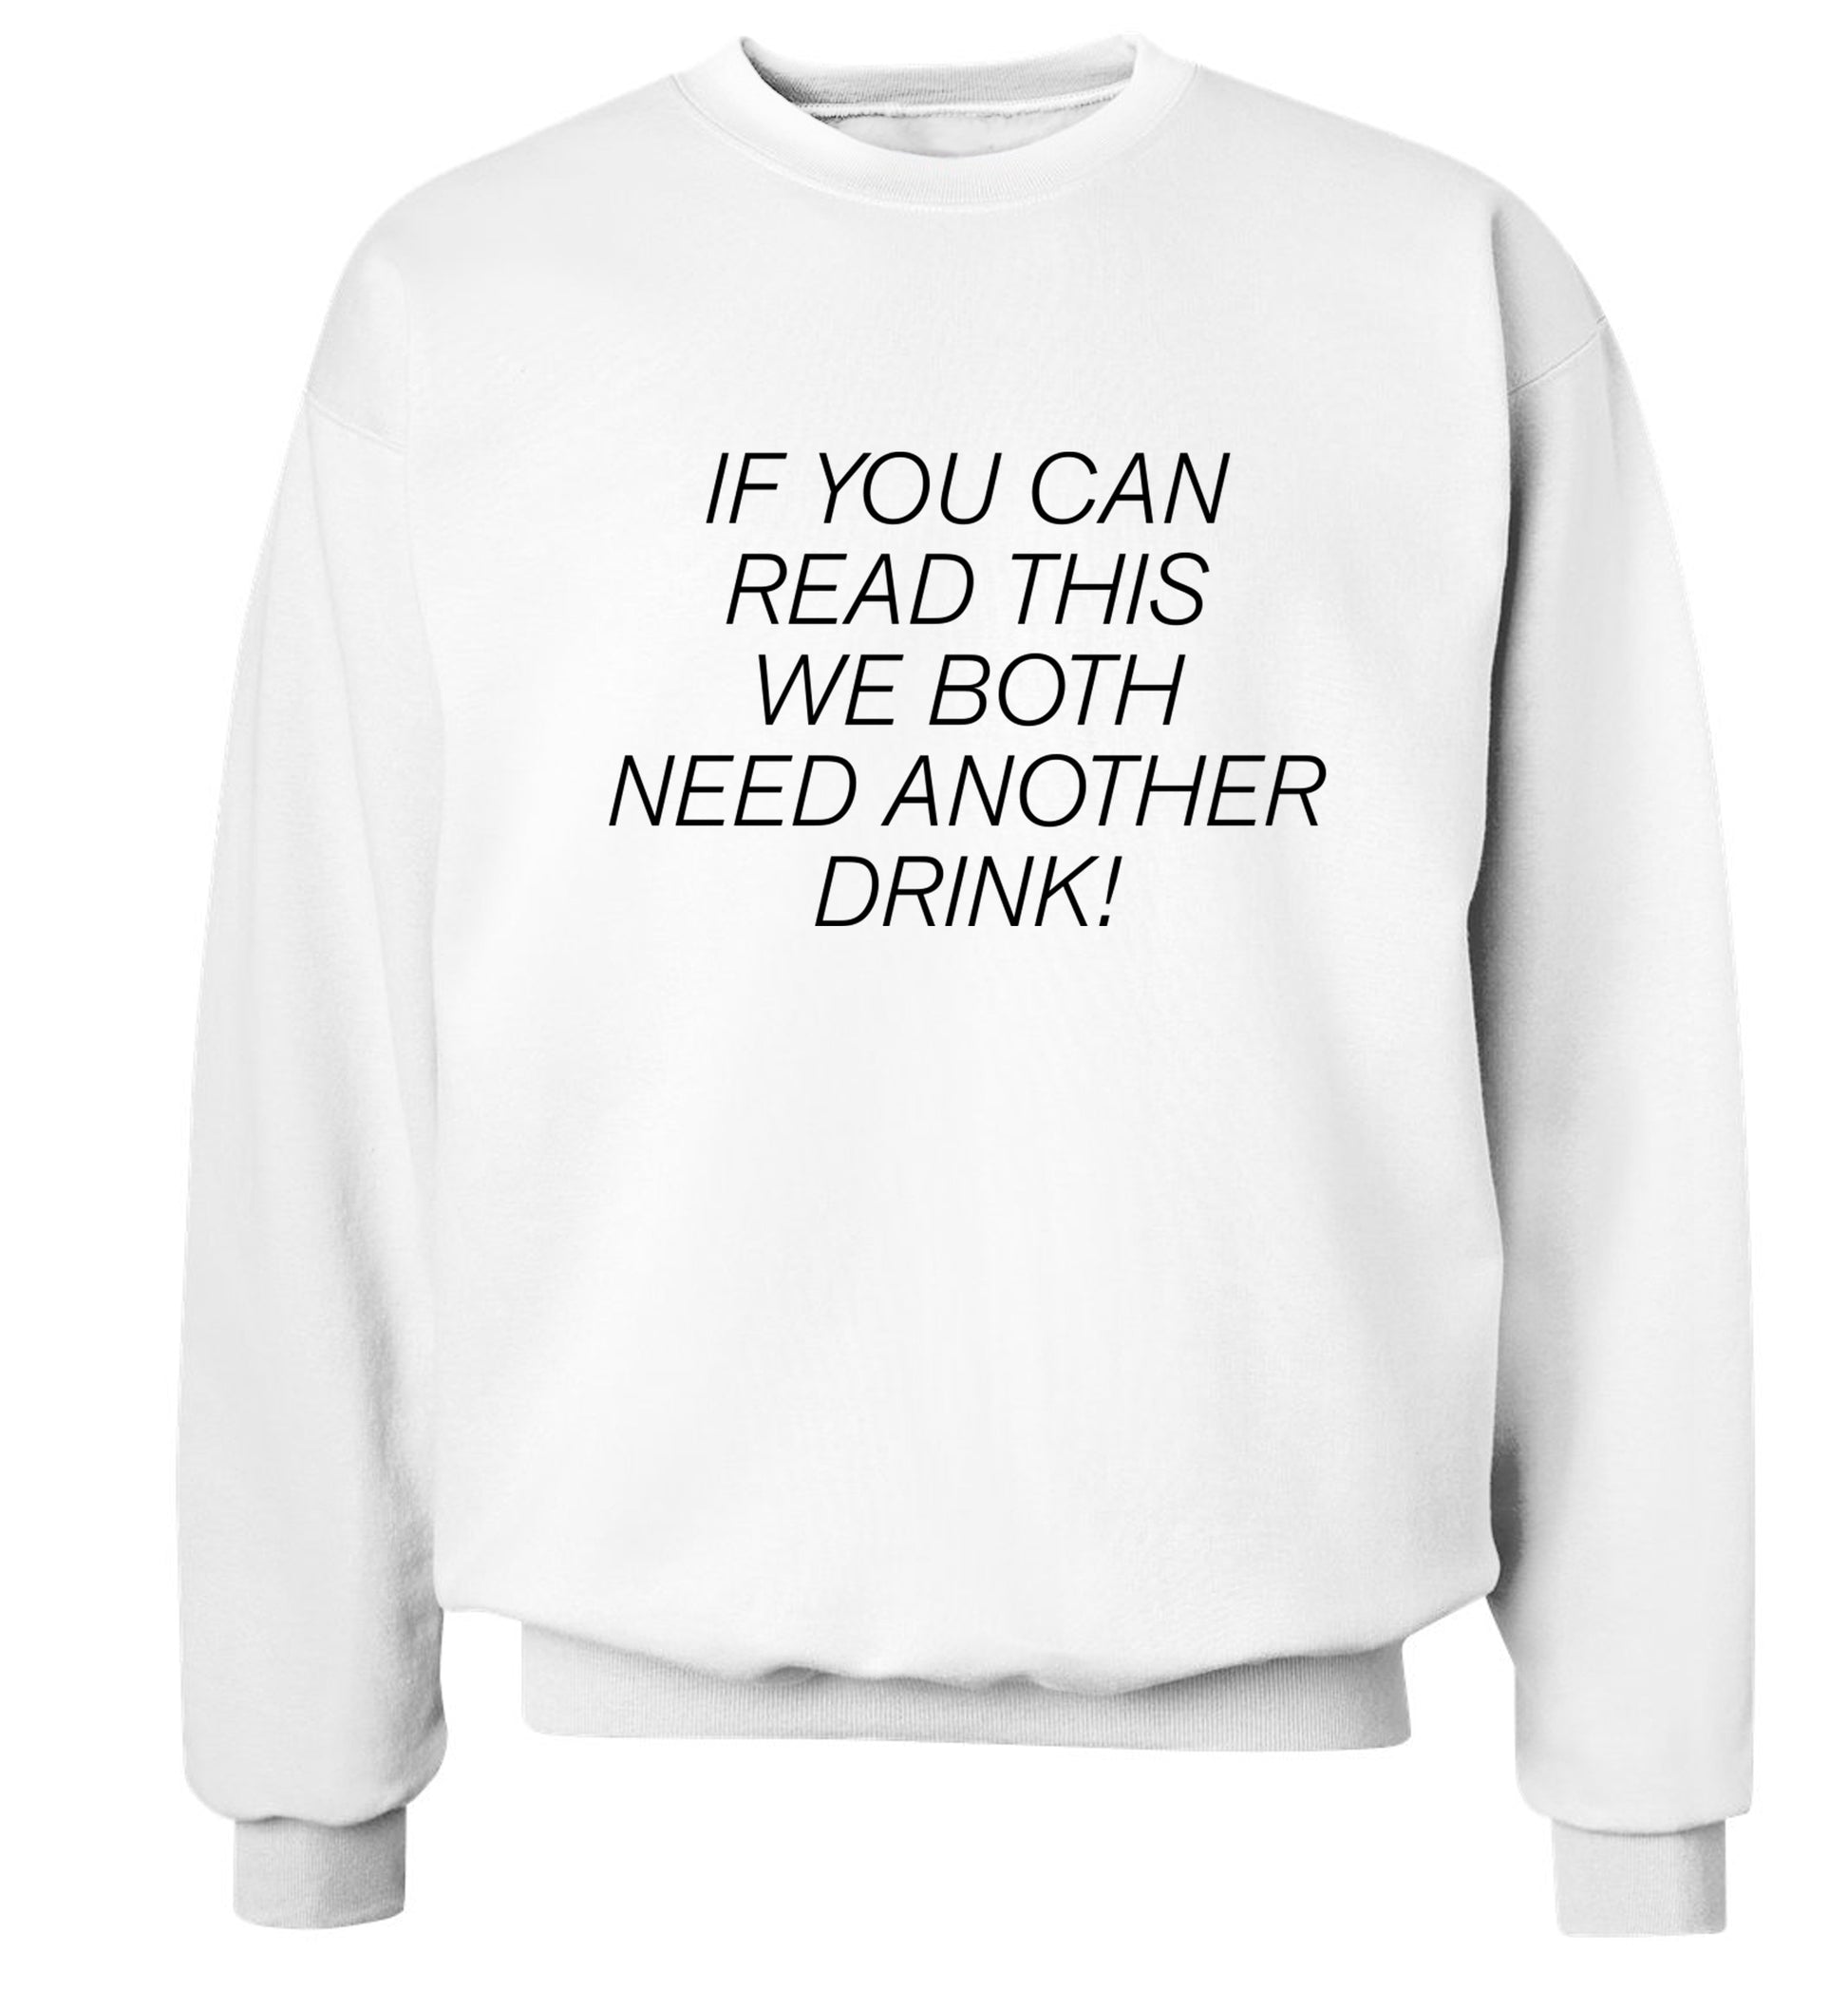 If you can read this we both need another drink! Adult's unisex white Sweater 2XL